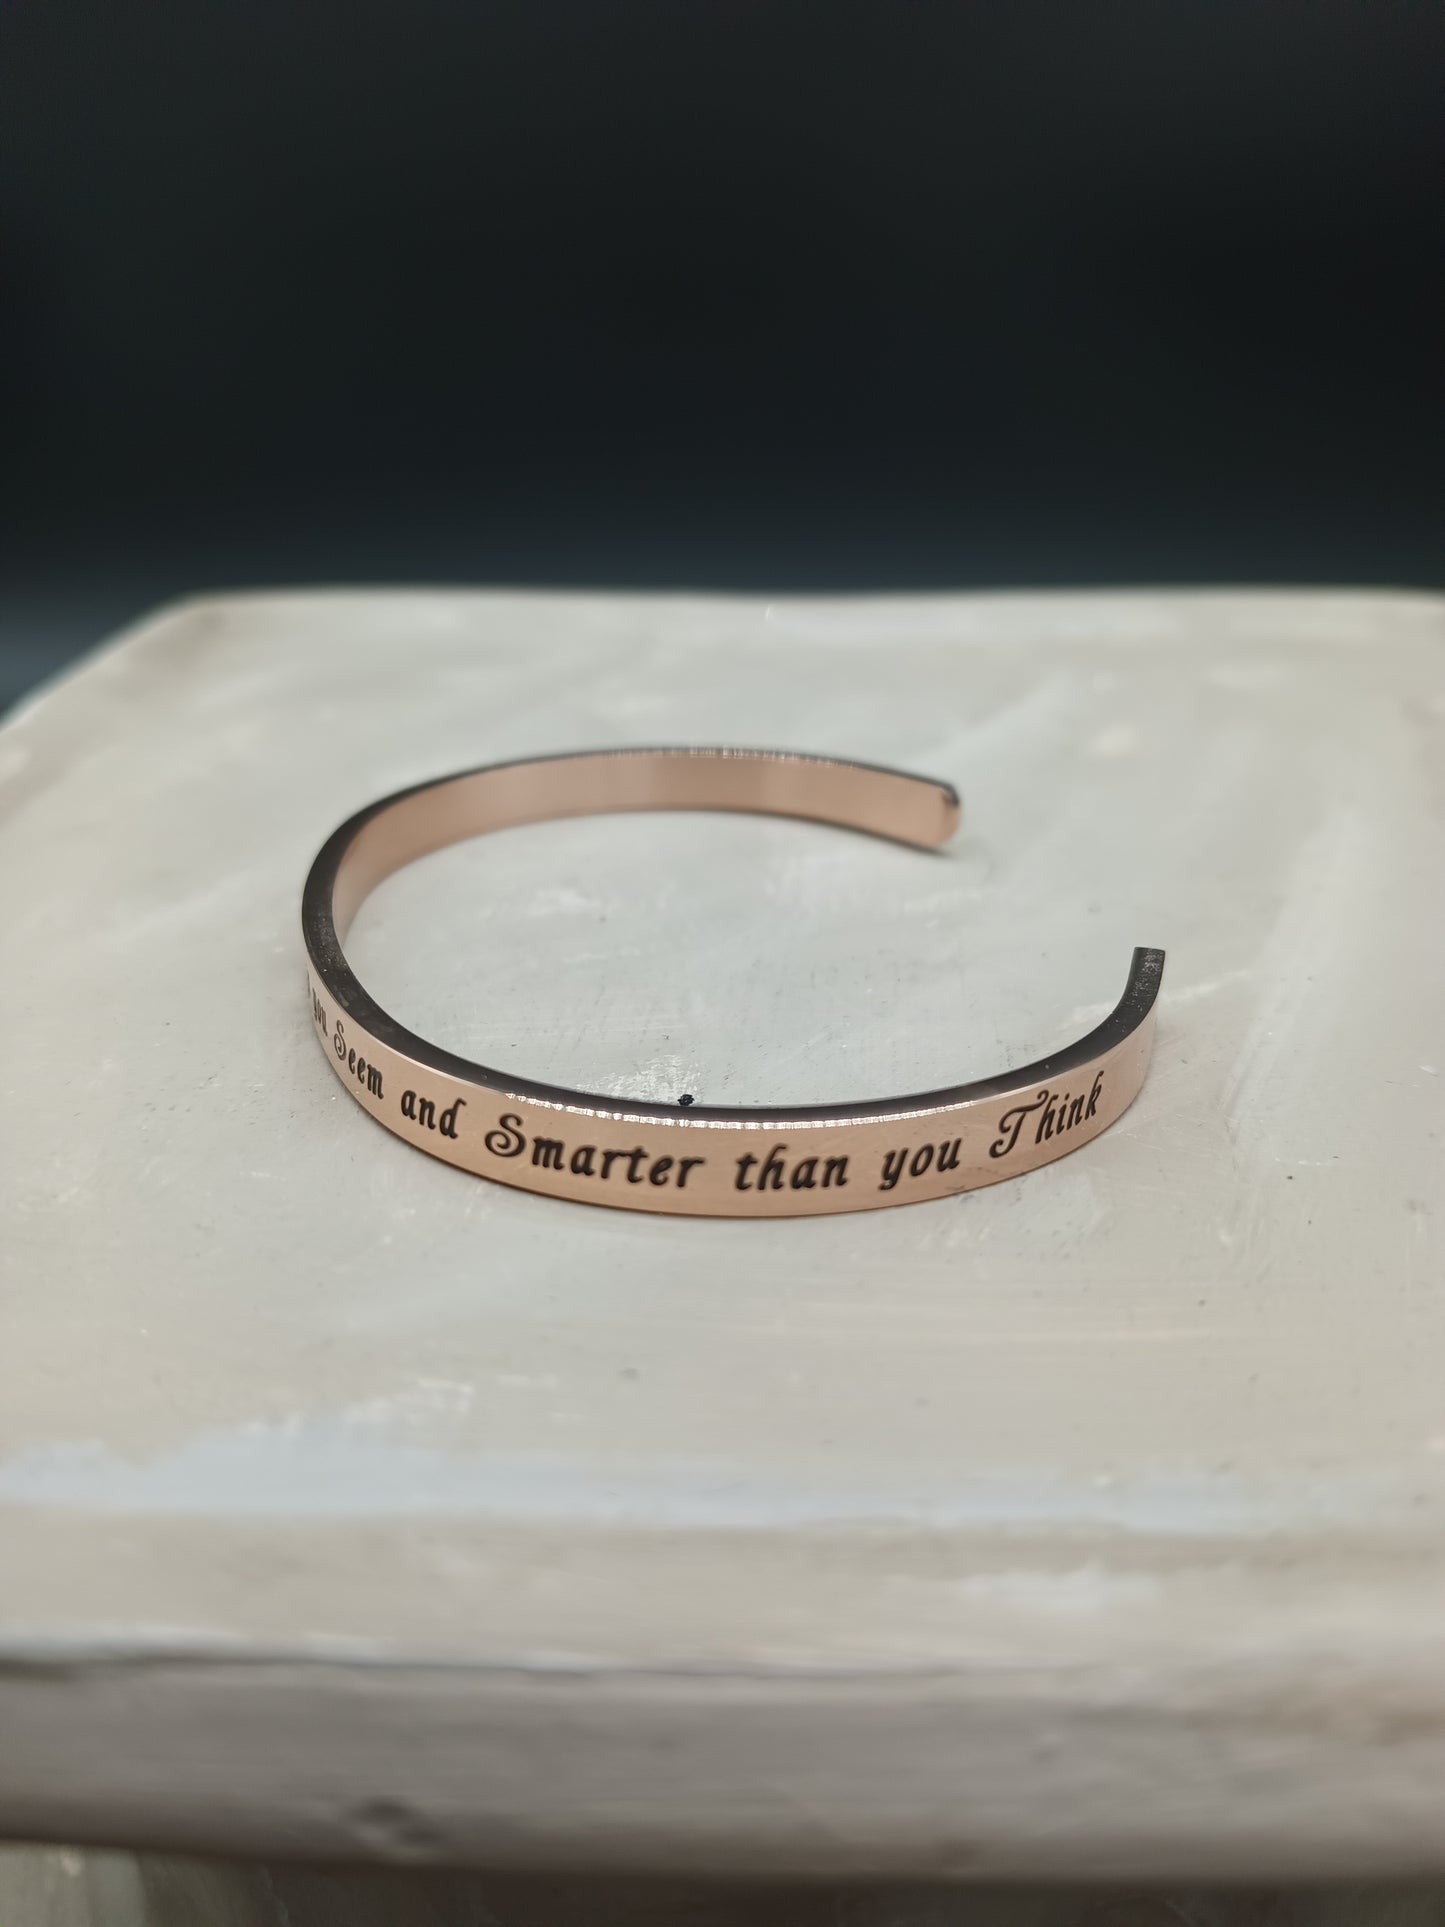 Kendasun Jewelry Cuff Bangle Bracelet  “You are Braver than you Believe Stronger than you Seem and Smarter than you Think”